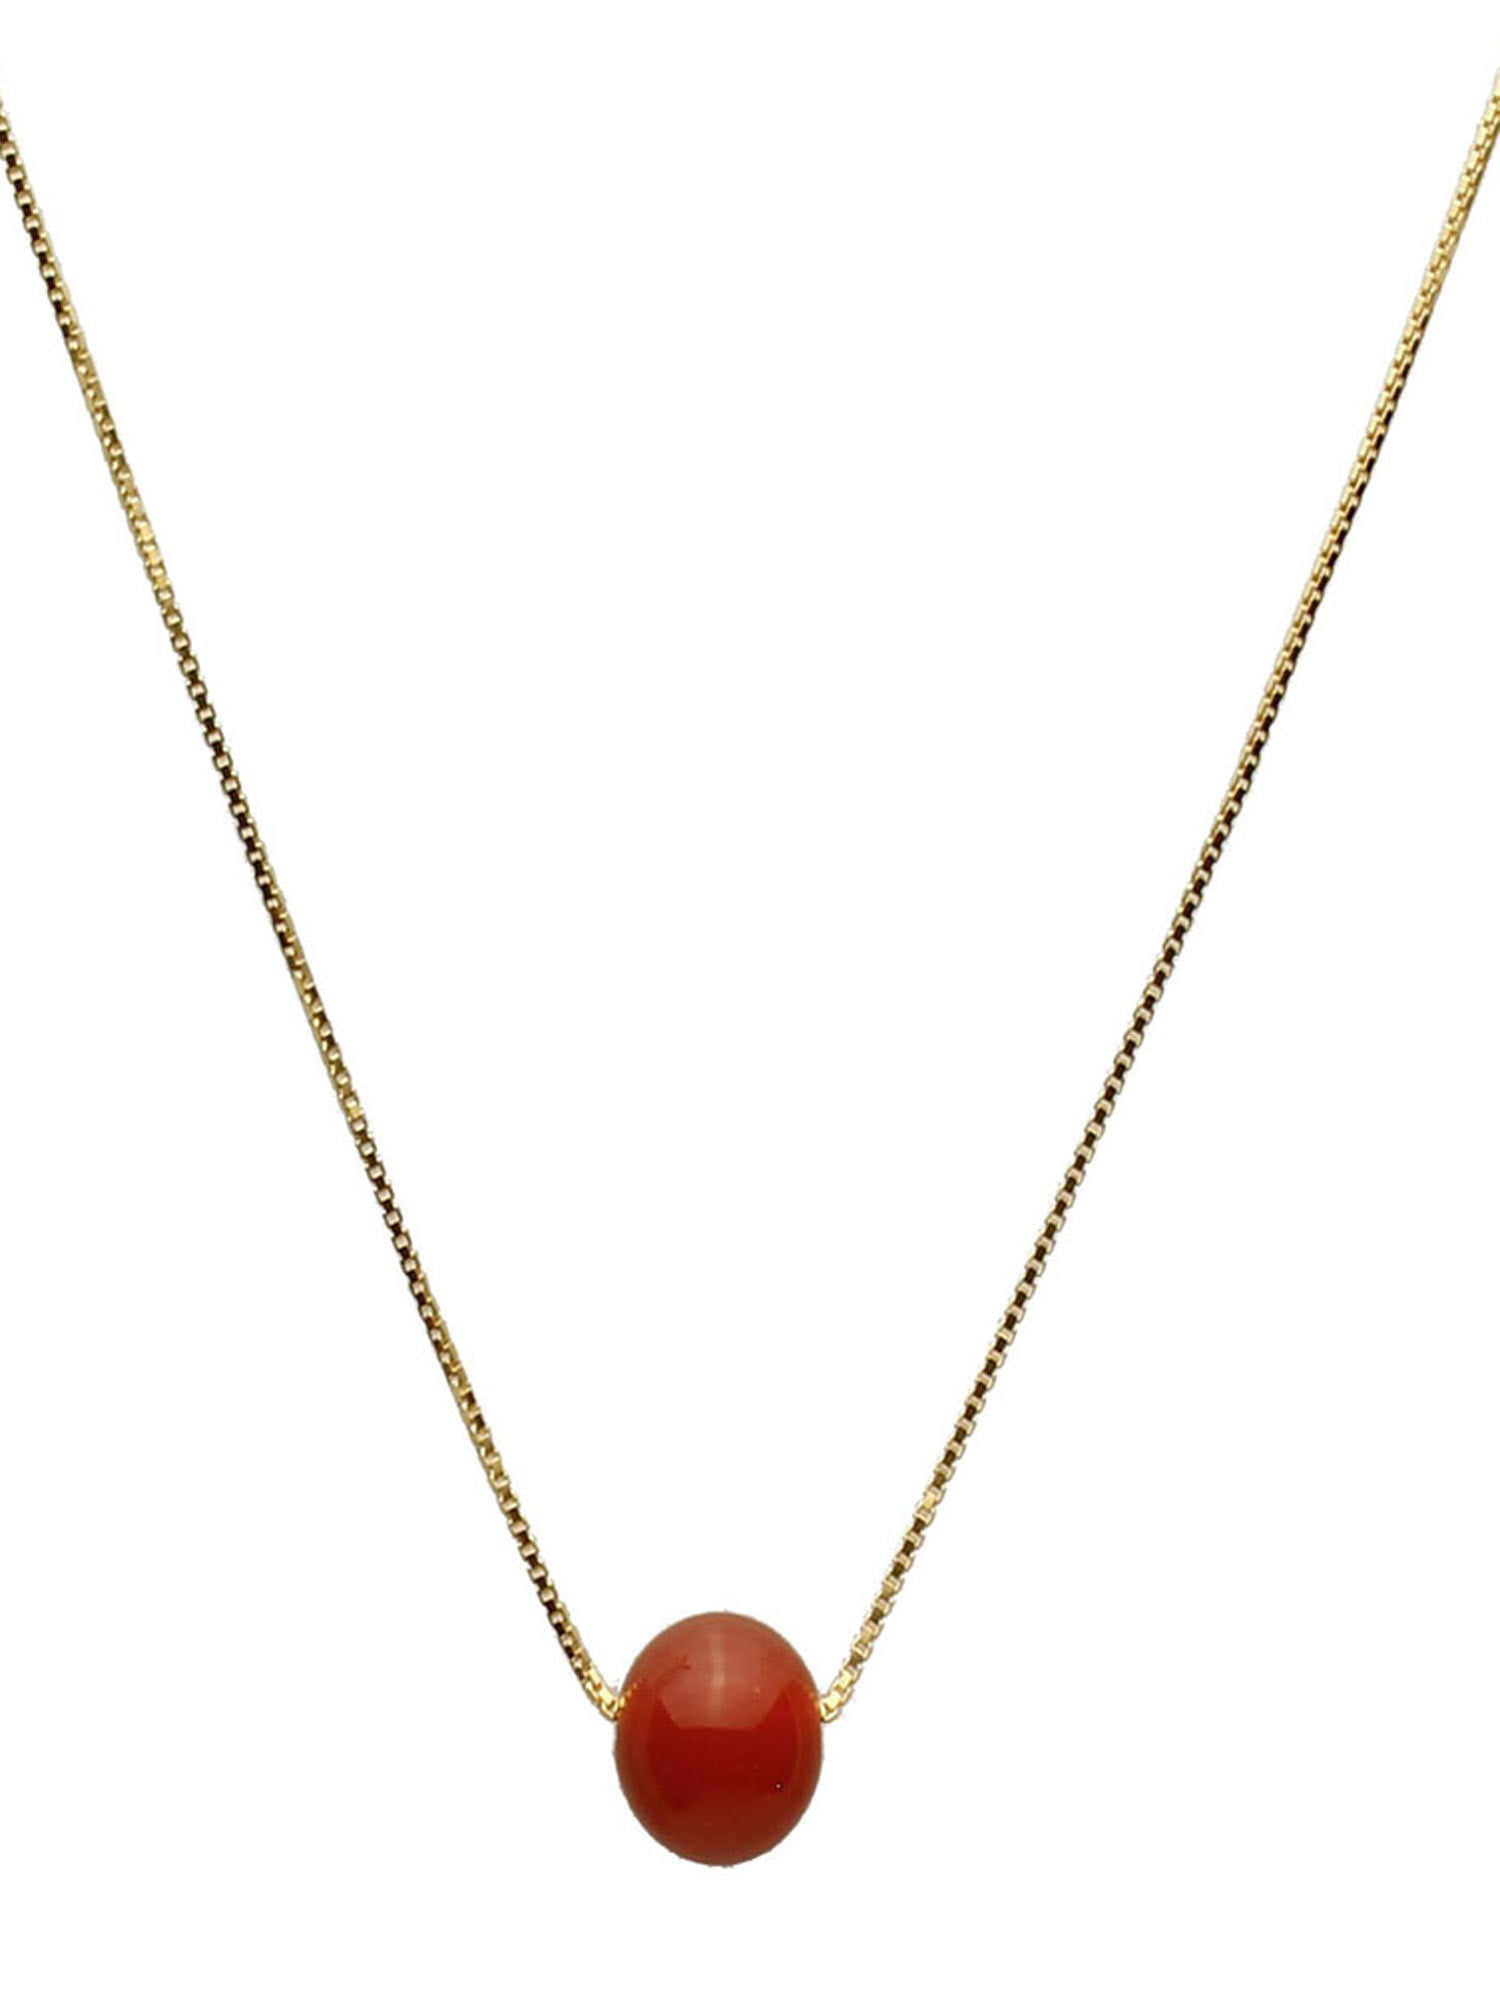 10mm Carnelian Stone Station 18KT Gold-Flashed Sterling Silver Box Chain Necklace Adjustable 20+2 